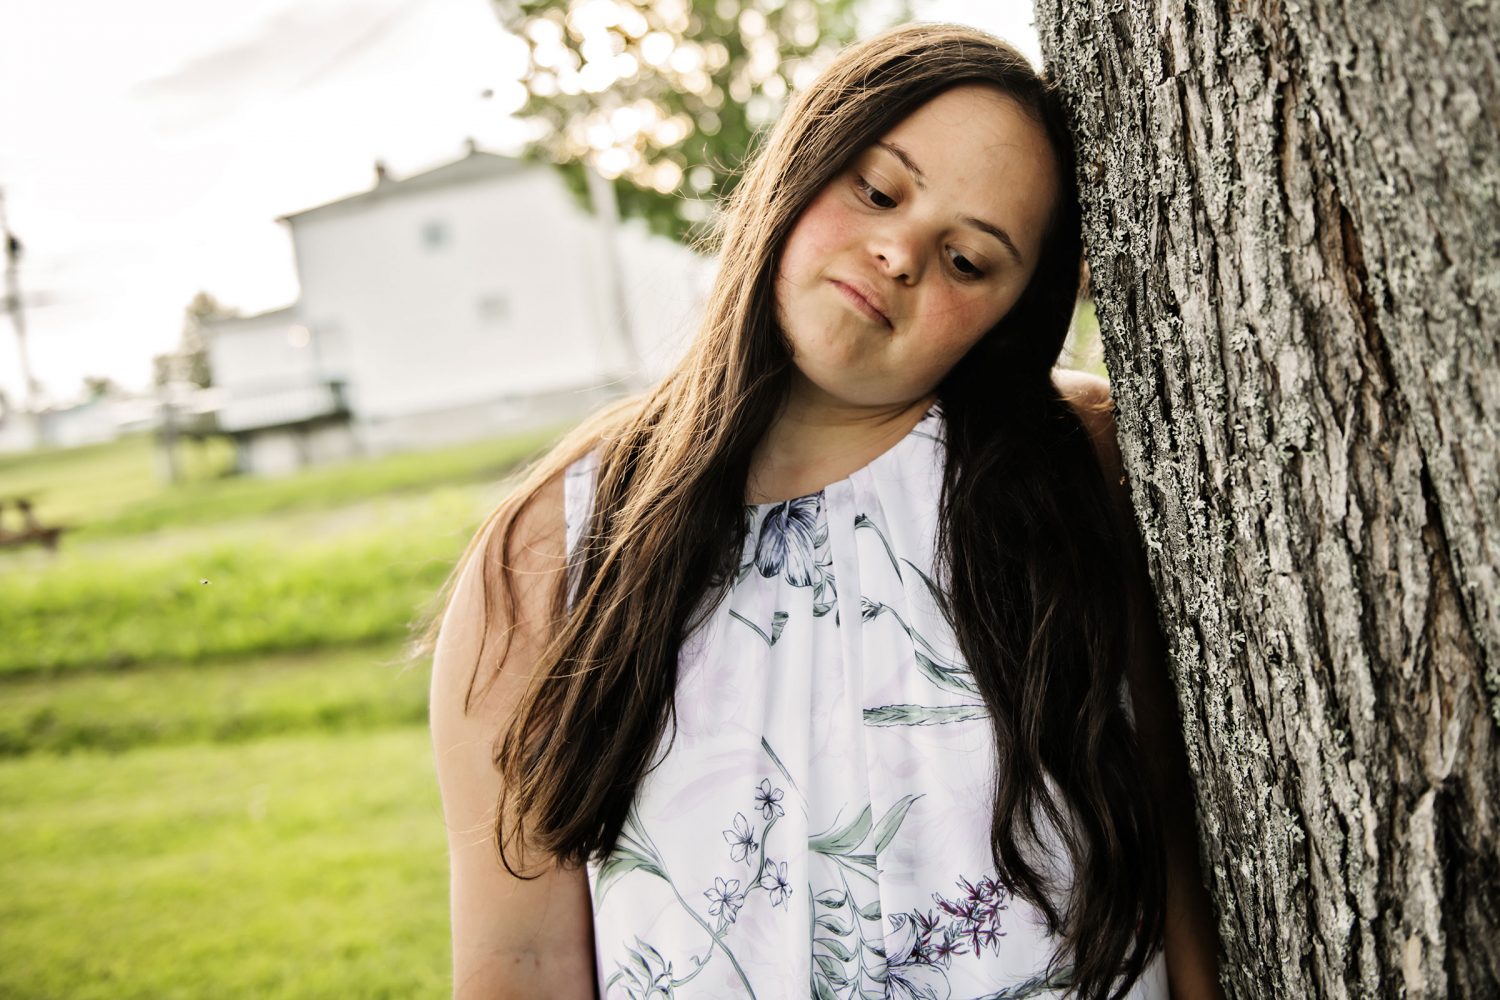 Sad young woman with Down syndrome leans against tree